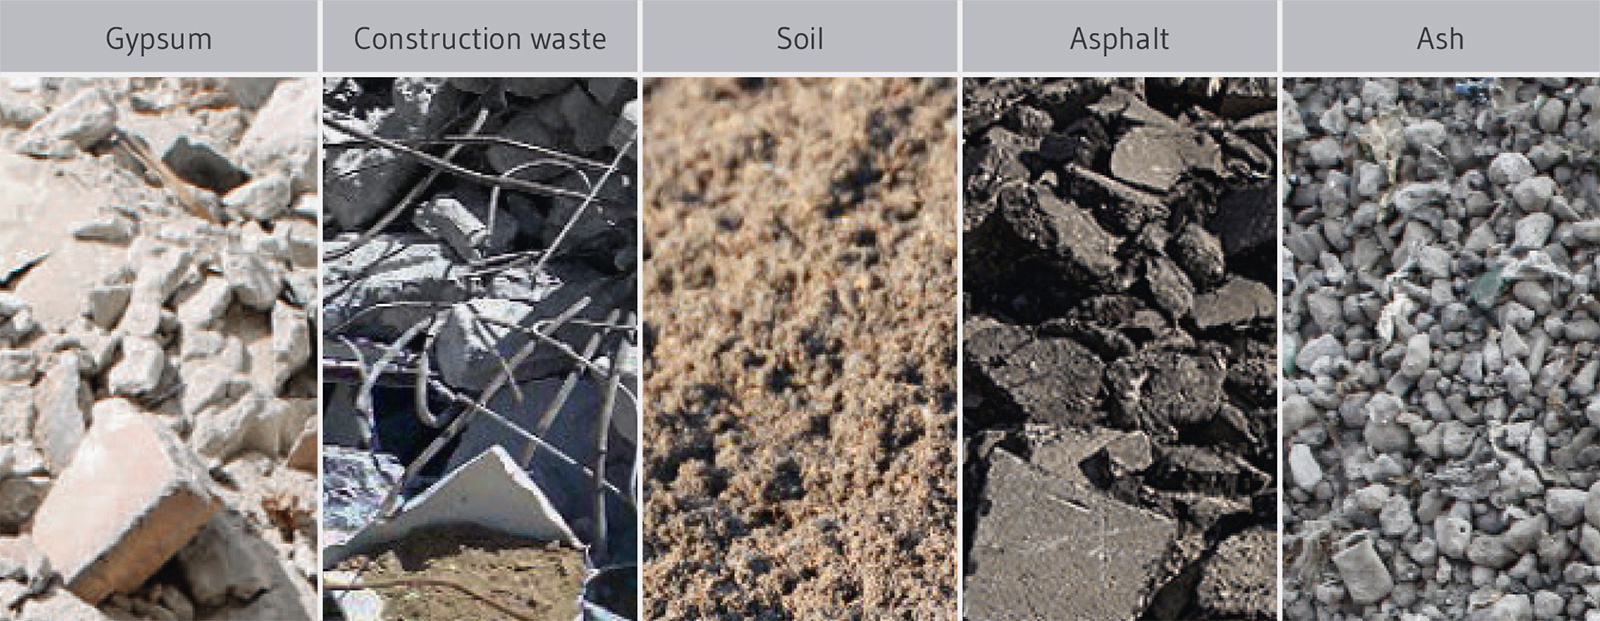 Mineral waste such as building rubble, soil or asphalt can be partially recycled